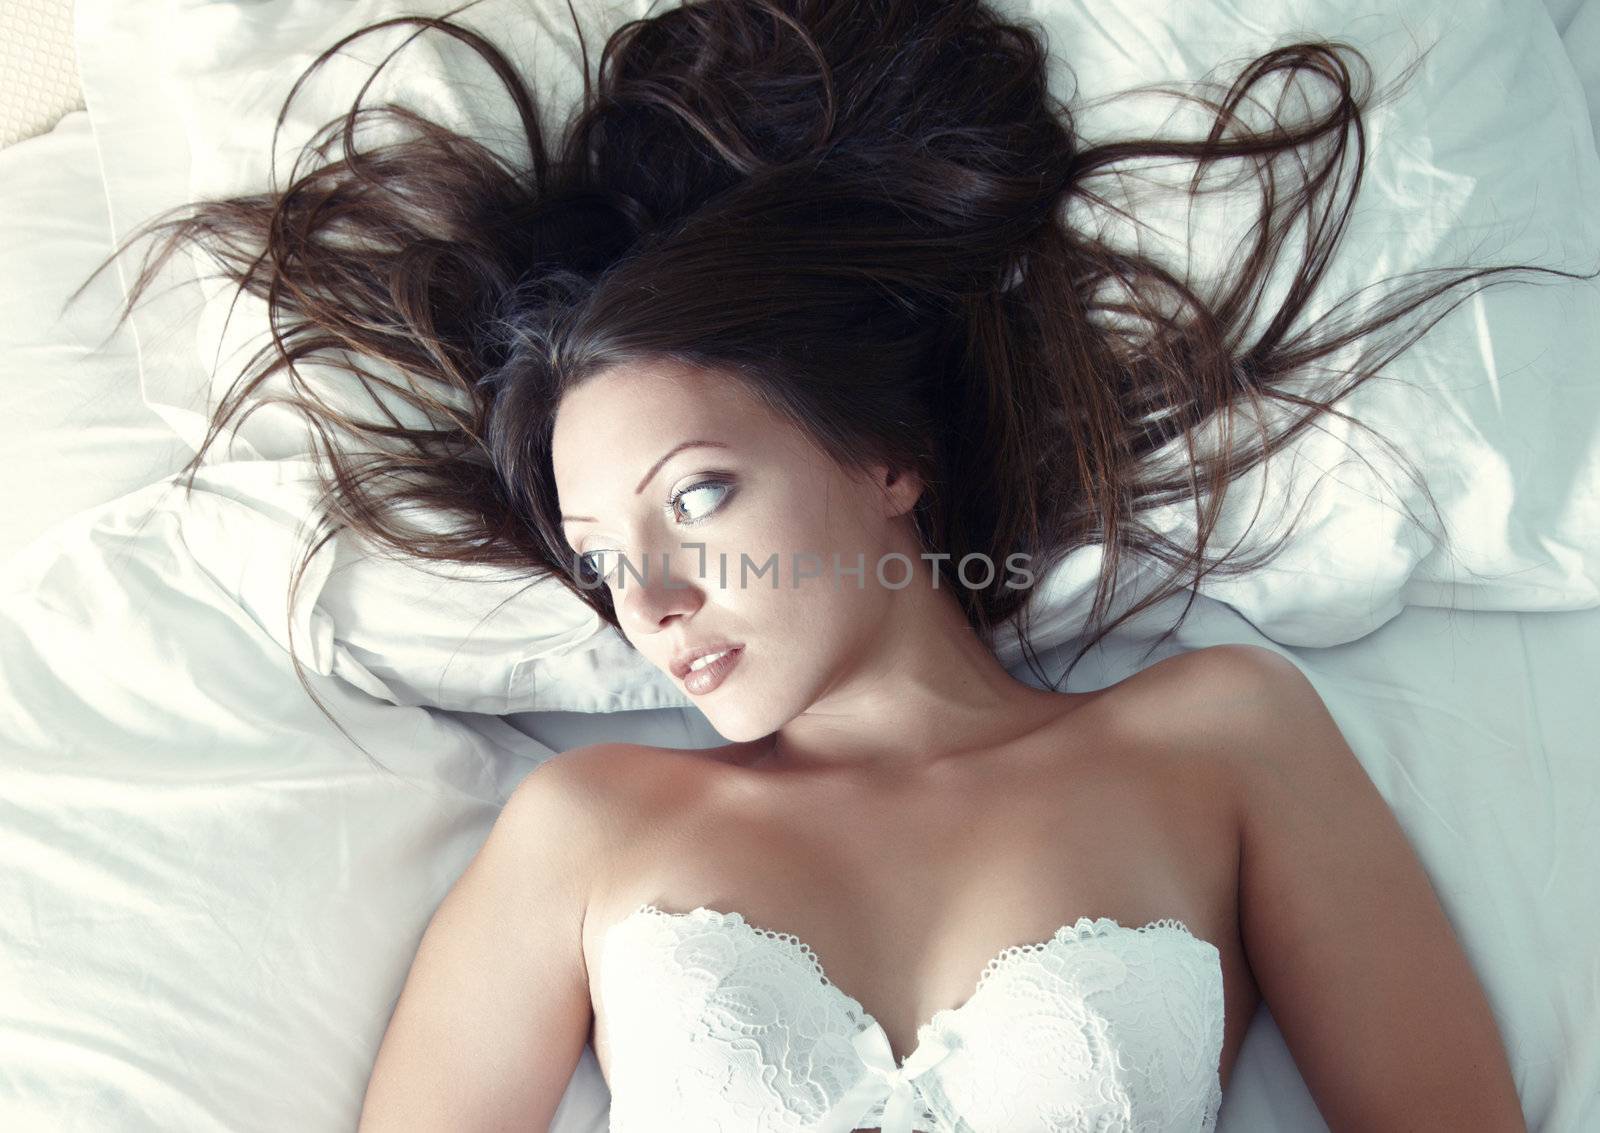 Pretty lady in camisole lays on the bed. Natural light and colors